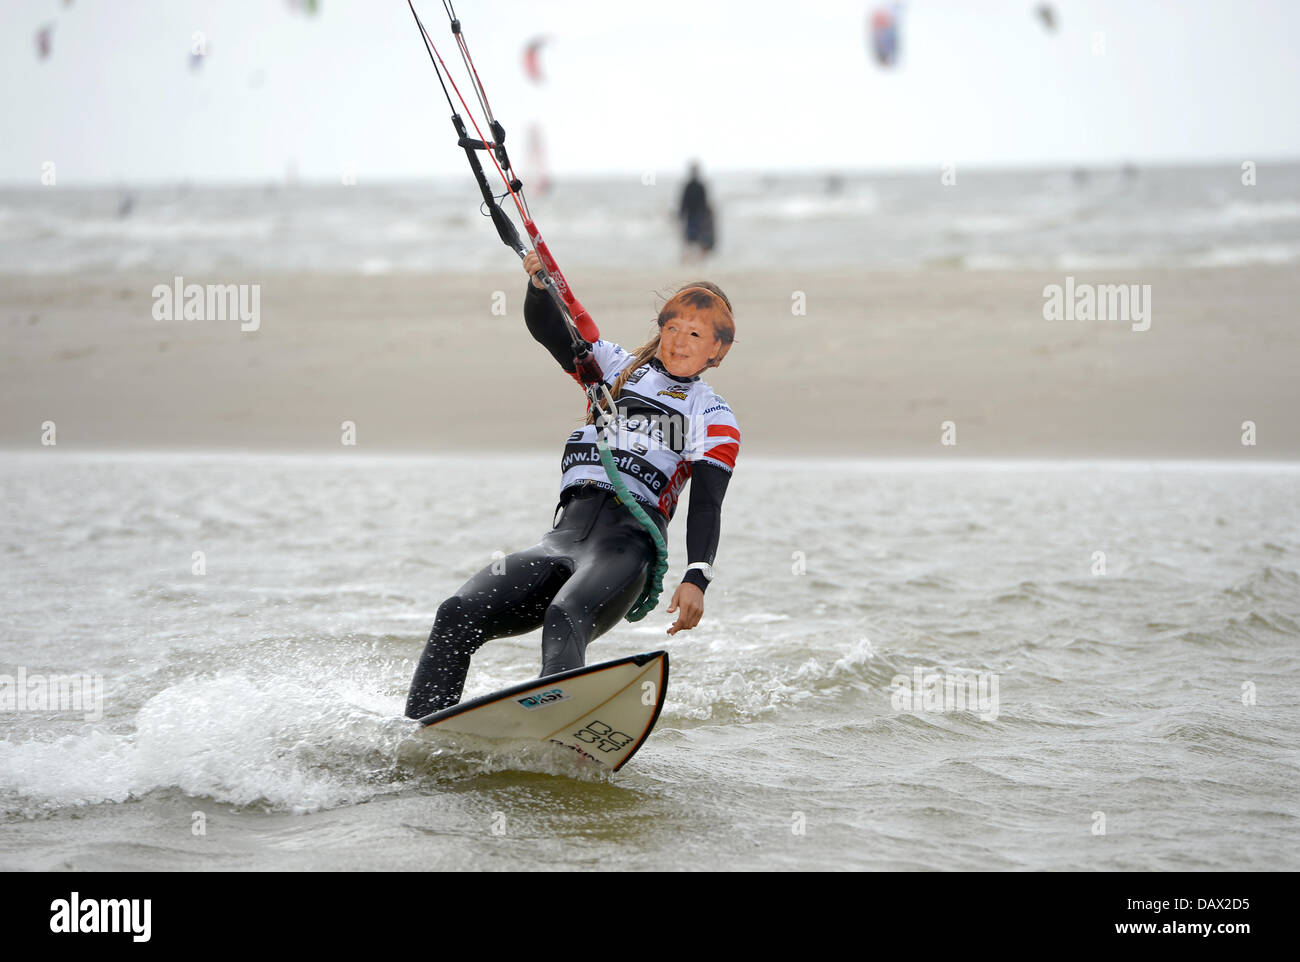 St. Peter-Ording, Germany. 19th July, 2013. Ninefold kitesurf world champion Kristin Boese of Germany drives with a mask of chancellor Merkel at the Kitesurf World Cup 2013 in St. Peter-Ording, Germany, 19 July 2013. The World Cup is the biggest kit surfing event in the world. Chancellor Merkel is expected in St. Peter-Ording in the evening during her summer tour. Photo: MARCUS BRANDT/dpa/Alamy Live News Stock Photo